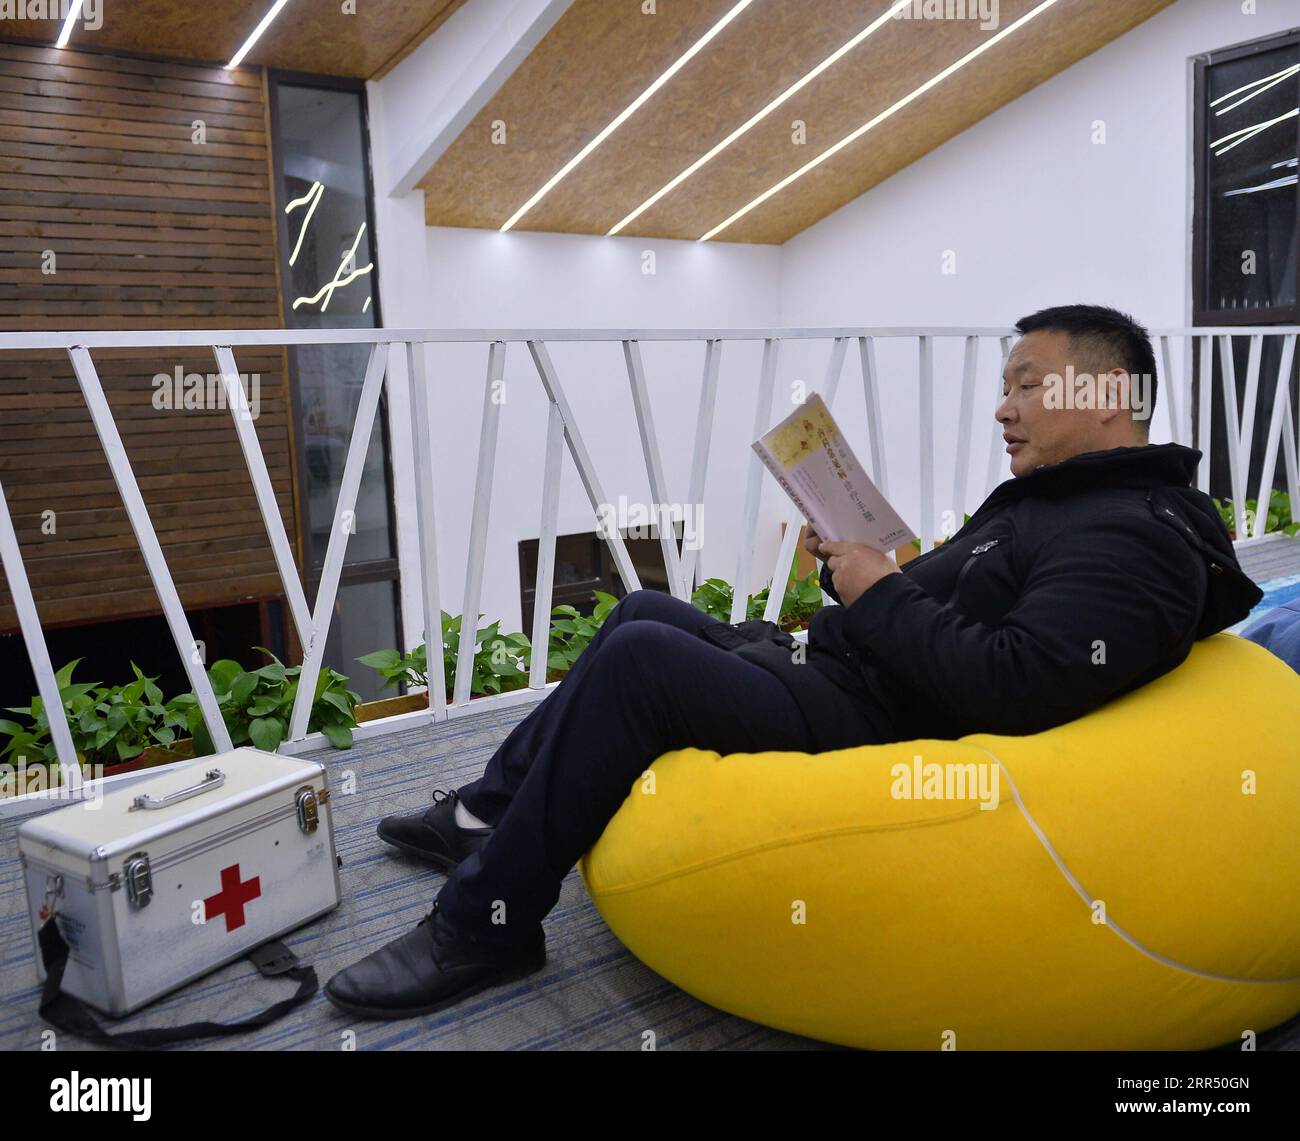 201218 -- JINZHAI, Dec. 18, 2020 -- Yu Jiajun reads a book at the new health station in Jinzhai County of Luan City, east China s Anhui Province, Dec. 15, 2020. Deep in the Xianghongdian Reservoir area in Jinzhai County of Luan City, east China s Anhui Province, there is an isolated island, which used to be home to over 40 poor families. Yu Jiajun, 42, is the only doctor in the village. In the past, there was no health station on the island. Villagers had to row a boat for two or three hours to go to the health center in Mabu Township to see the doctor. Yu said. When Yu Jiajun returned to the Stock Photo